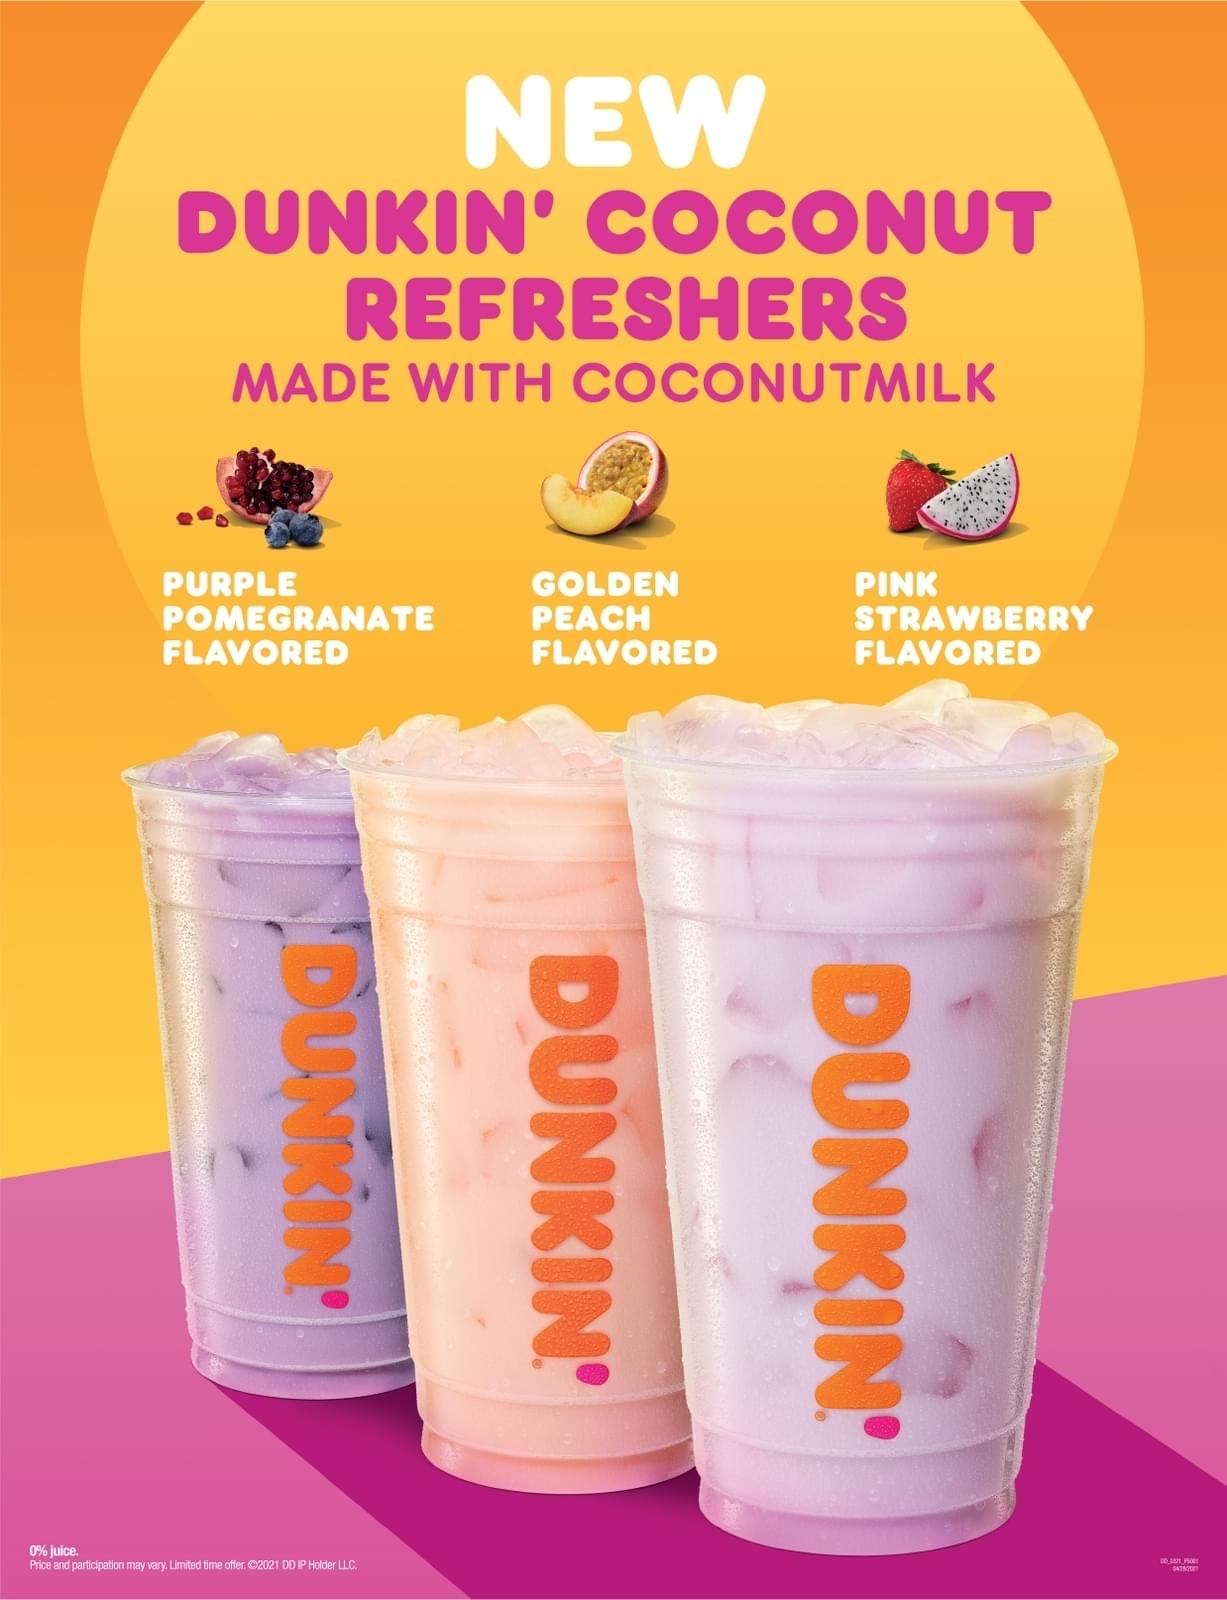 Dunkin Donuts Pink Strawberry Coconut Refreshers Nutrition Facts